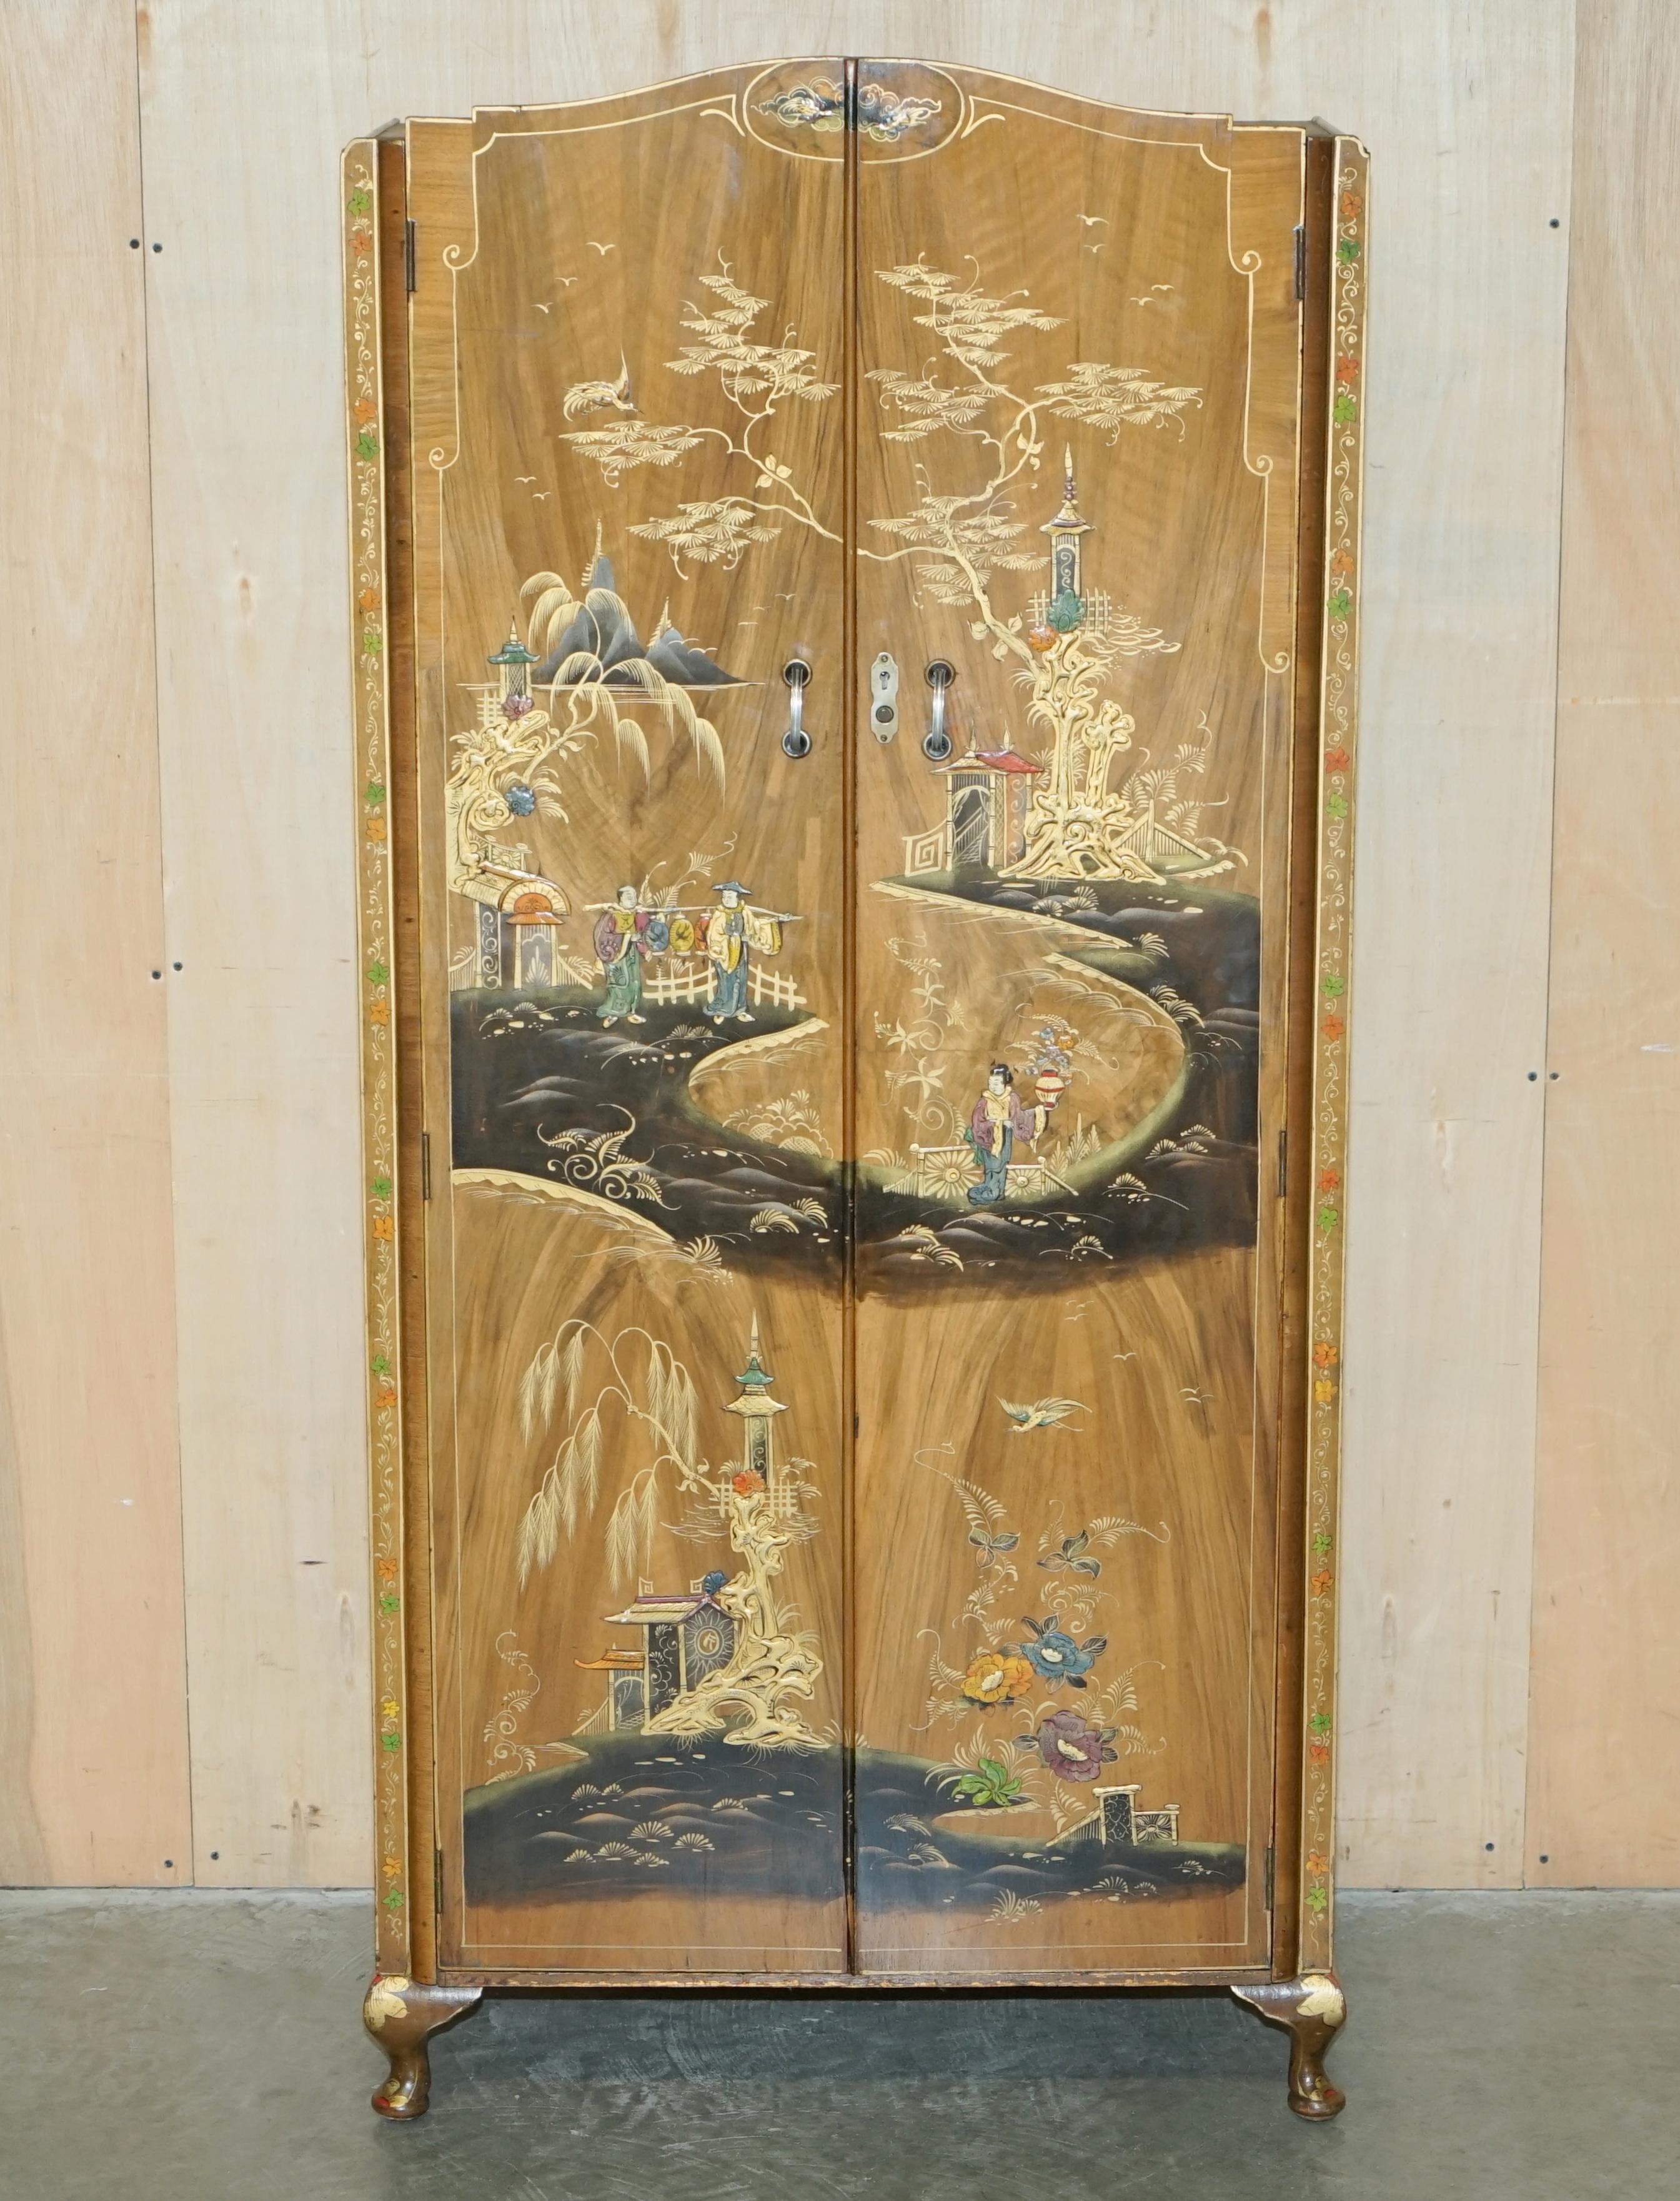 Royal House Antiques

Royal House Antiques is delighted to offer for sale this exquisite Chinese export chinoiserie walnut double wardrobe which is part of a suite. 

Please note the delivery fee listed is just a guide, it covers within the M25 only